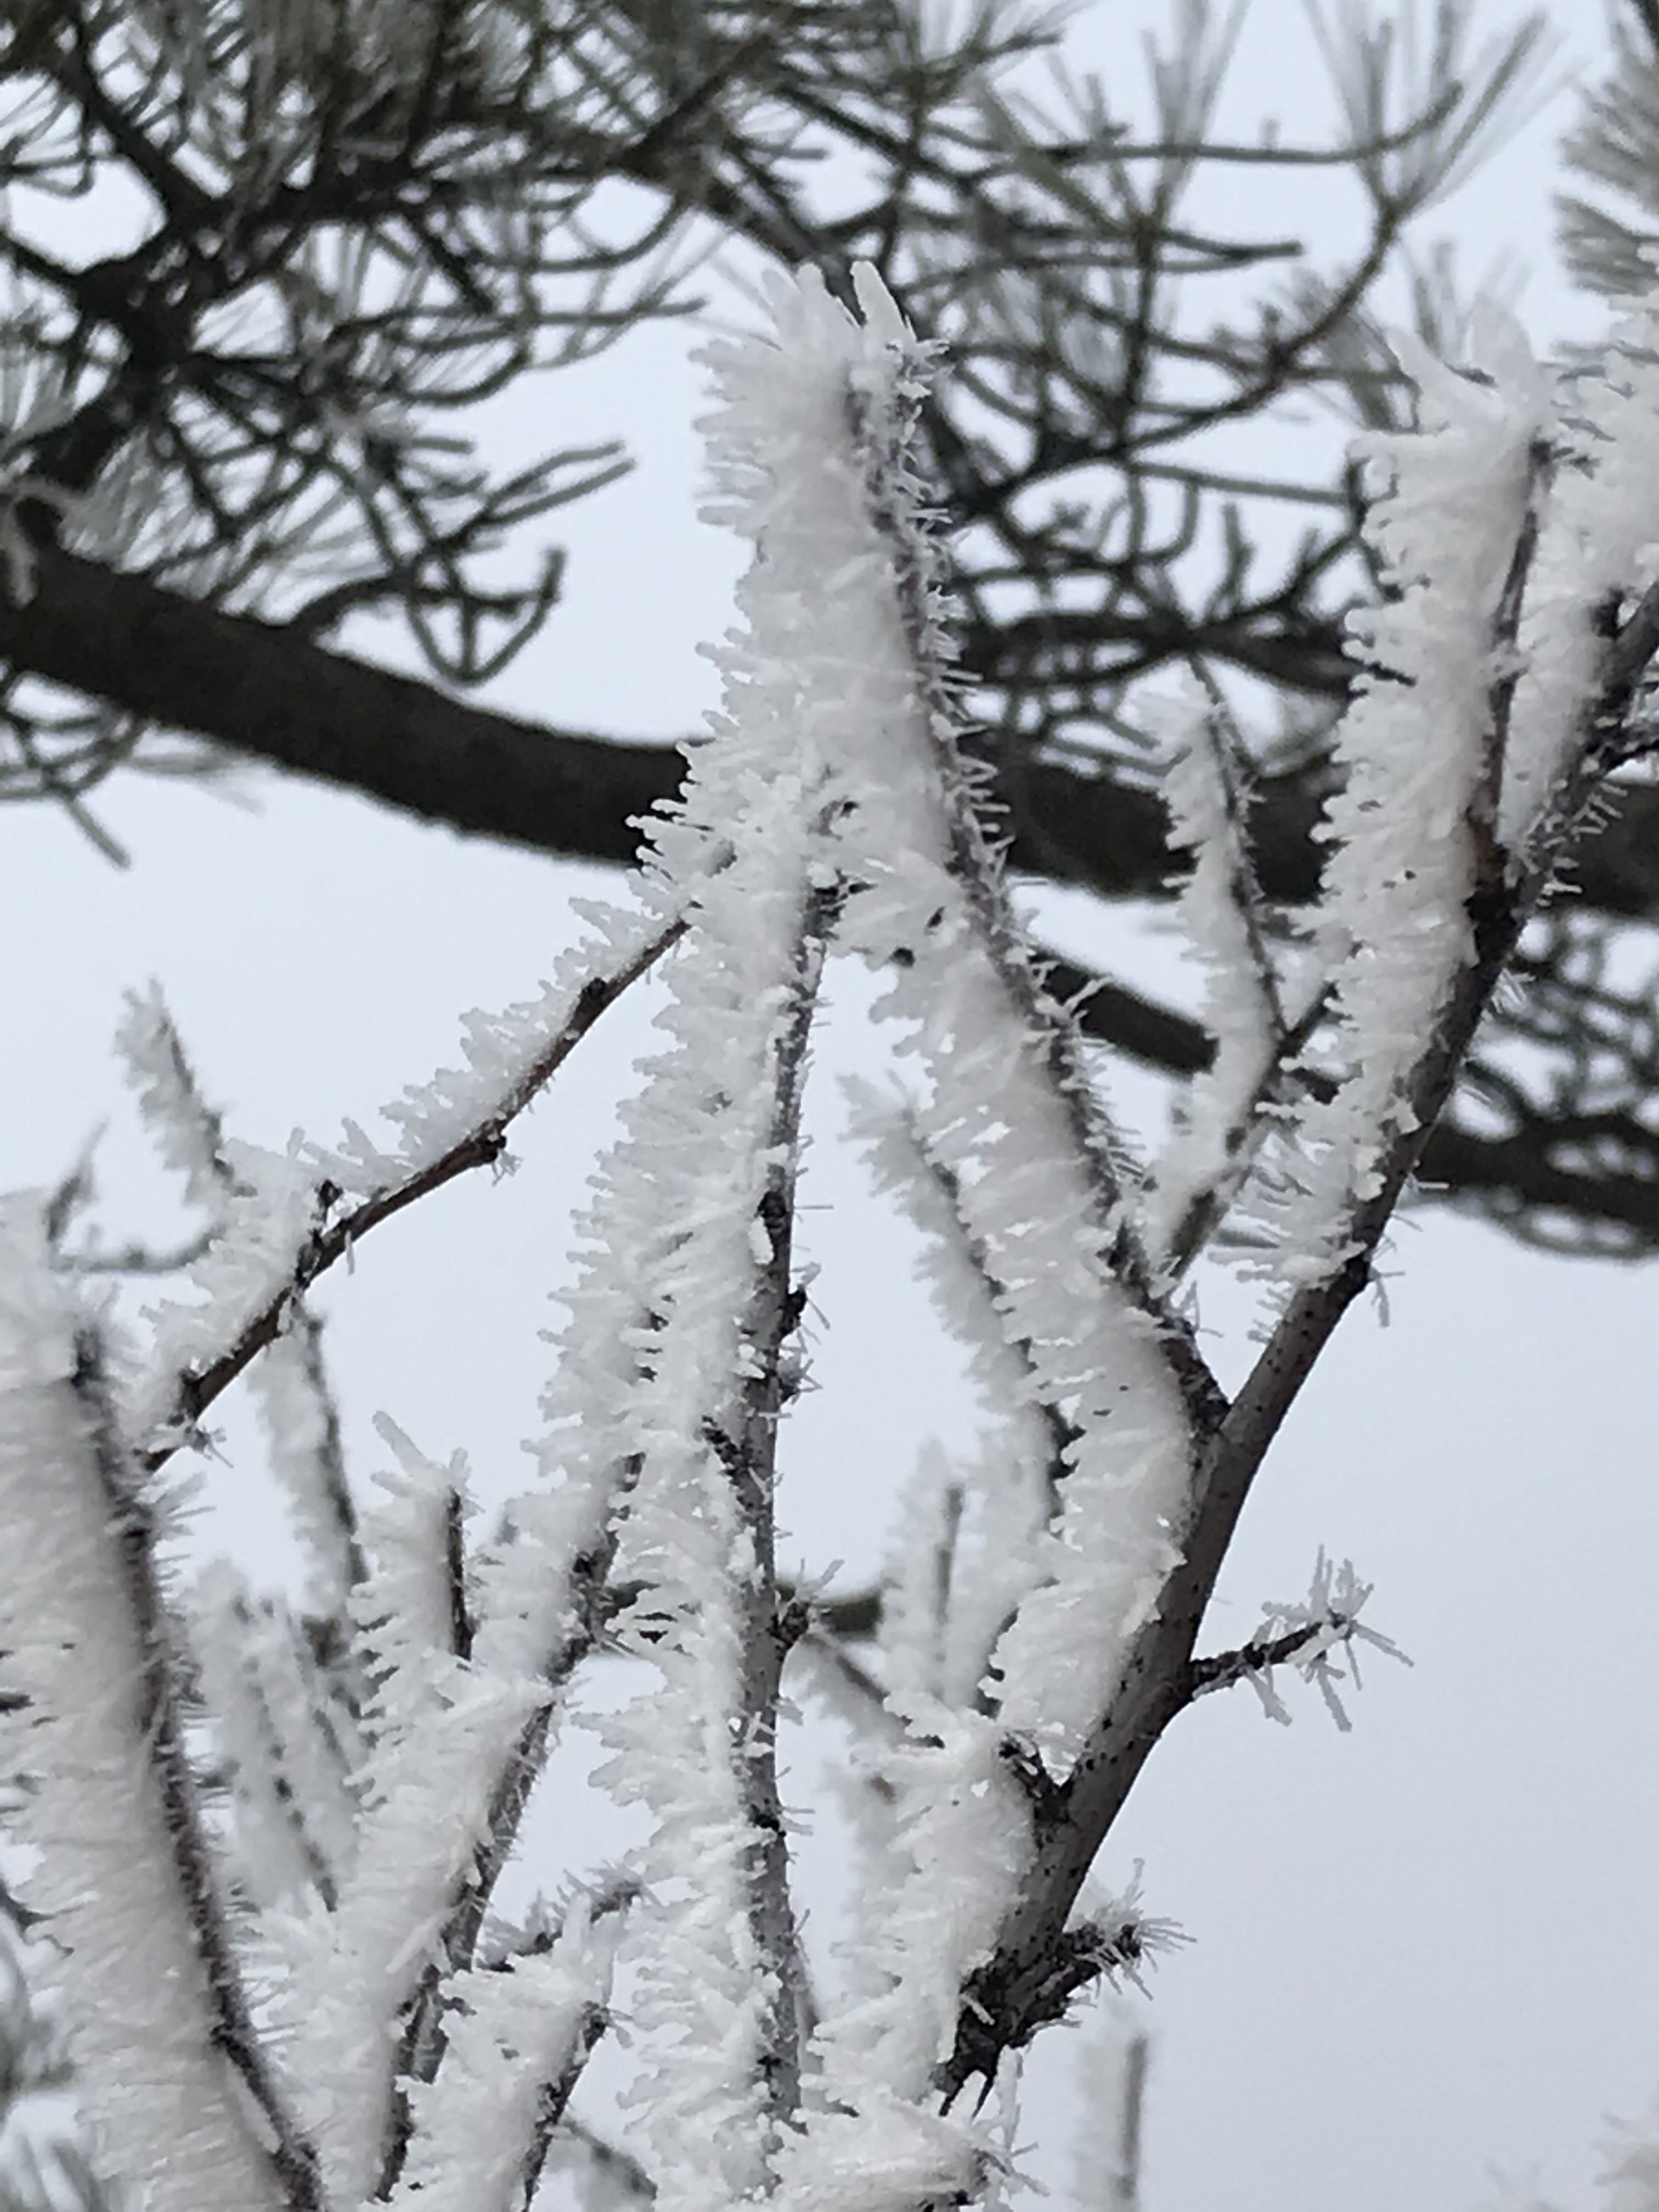 Close-up view of bare tree branches that are covered in frosty needles of ice